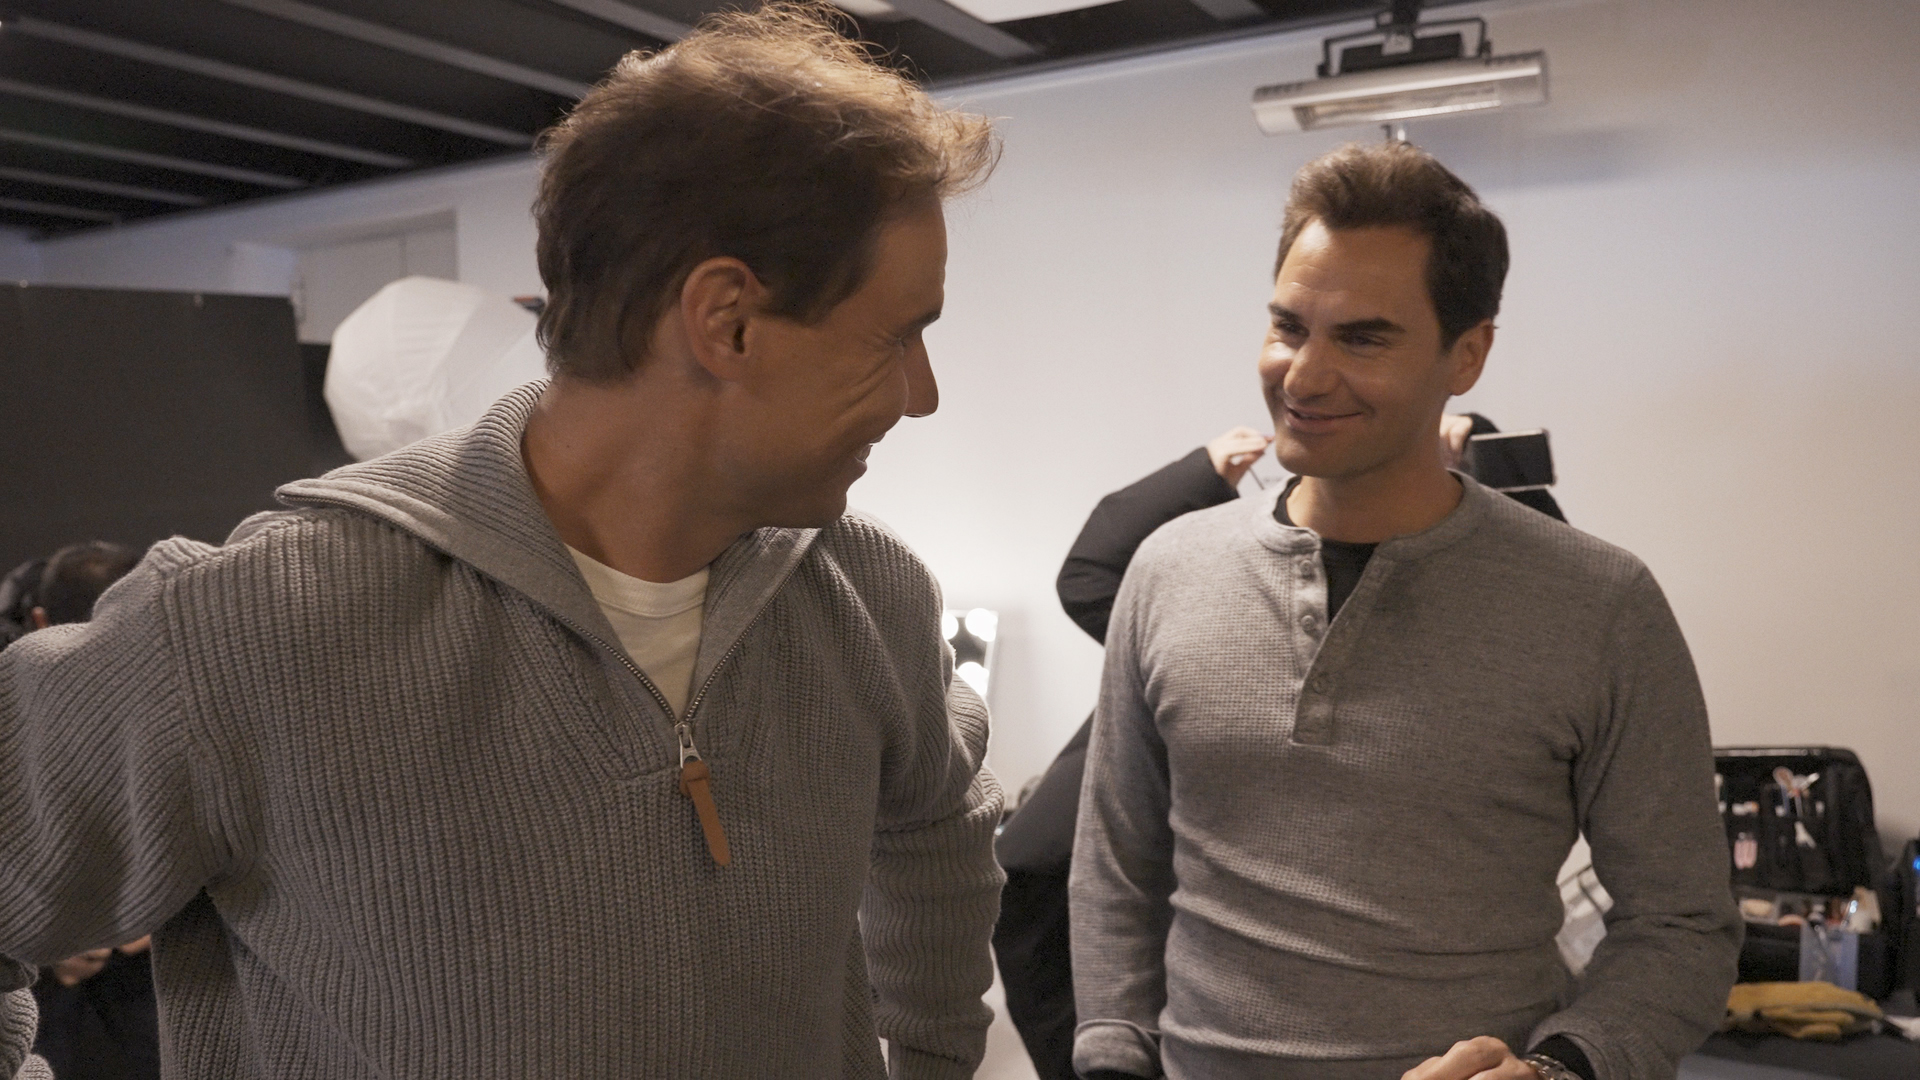 Roger Federer & Rafael Nadal seen together in Louis Vuitton's 2024 Core Values campaign